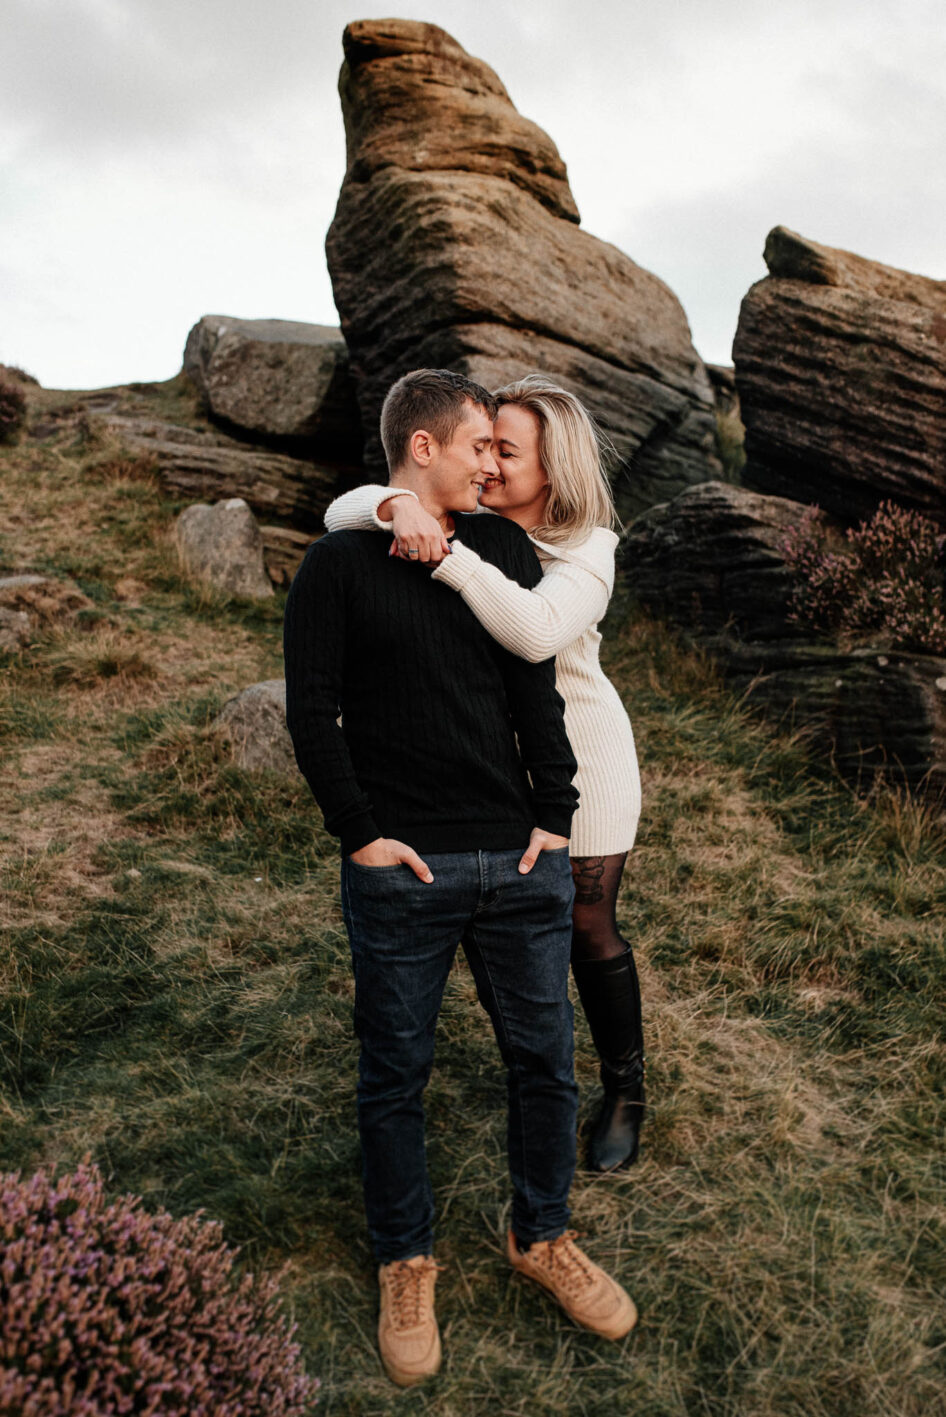 A young couple during their engagement photo shoot in the Peaks outside Sheffield